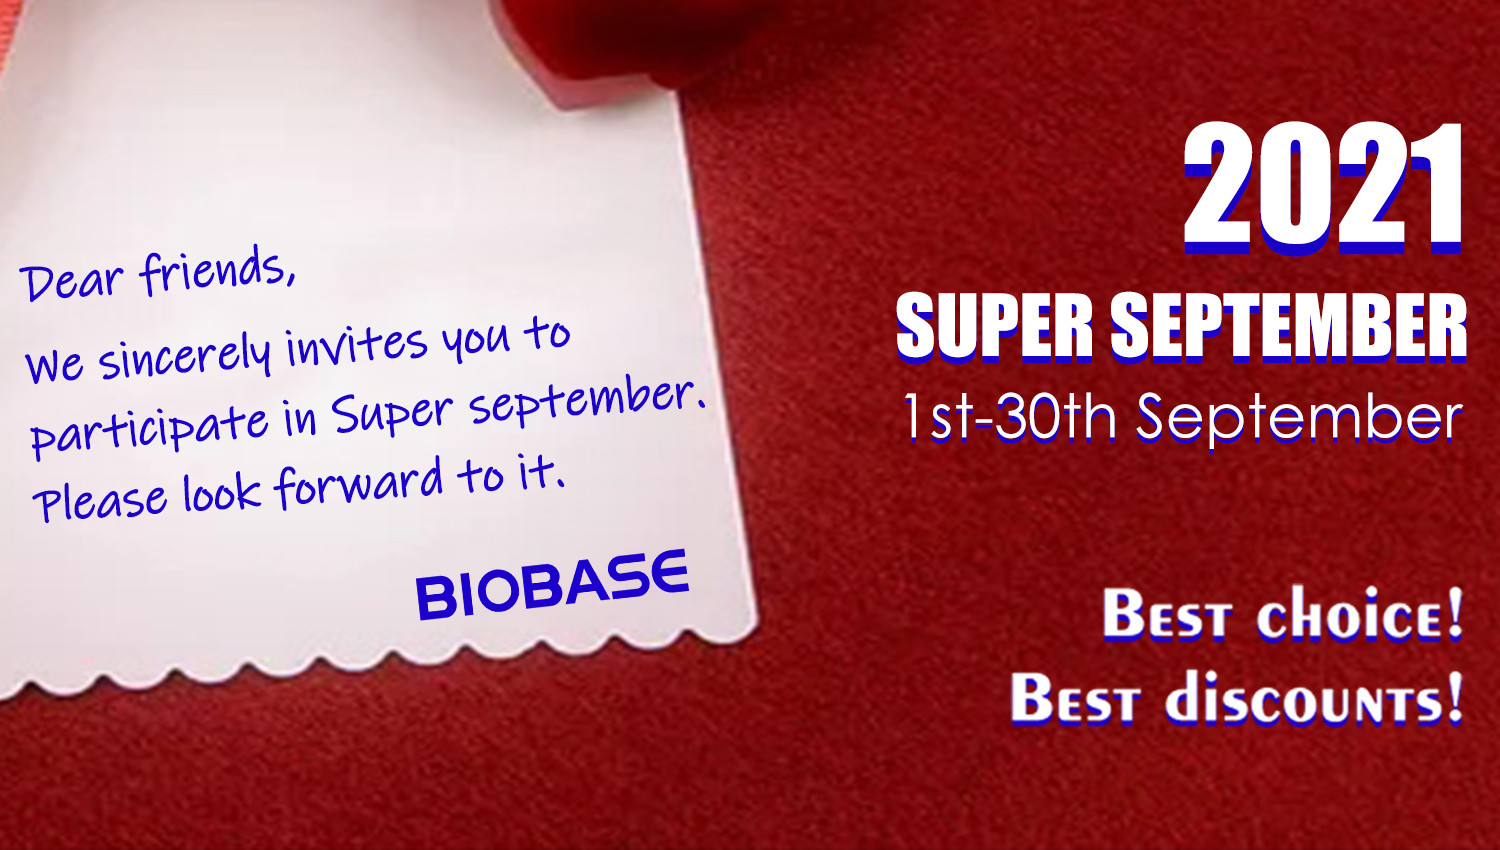 Super September is coming, are you ready?